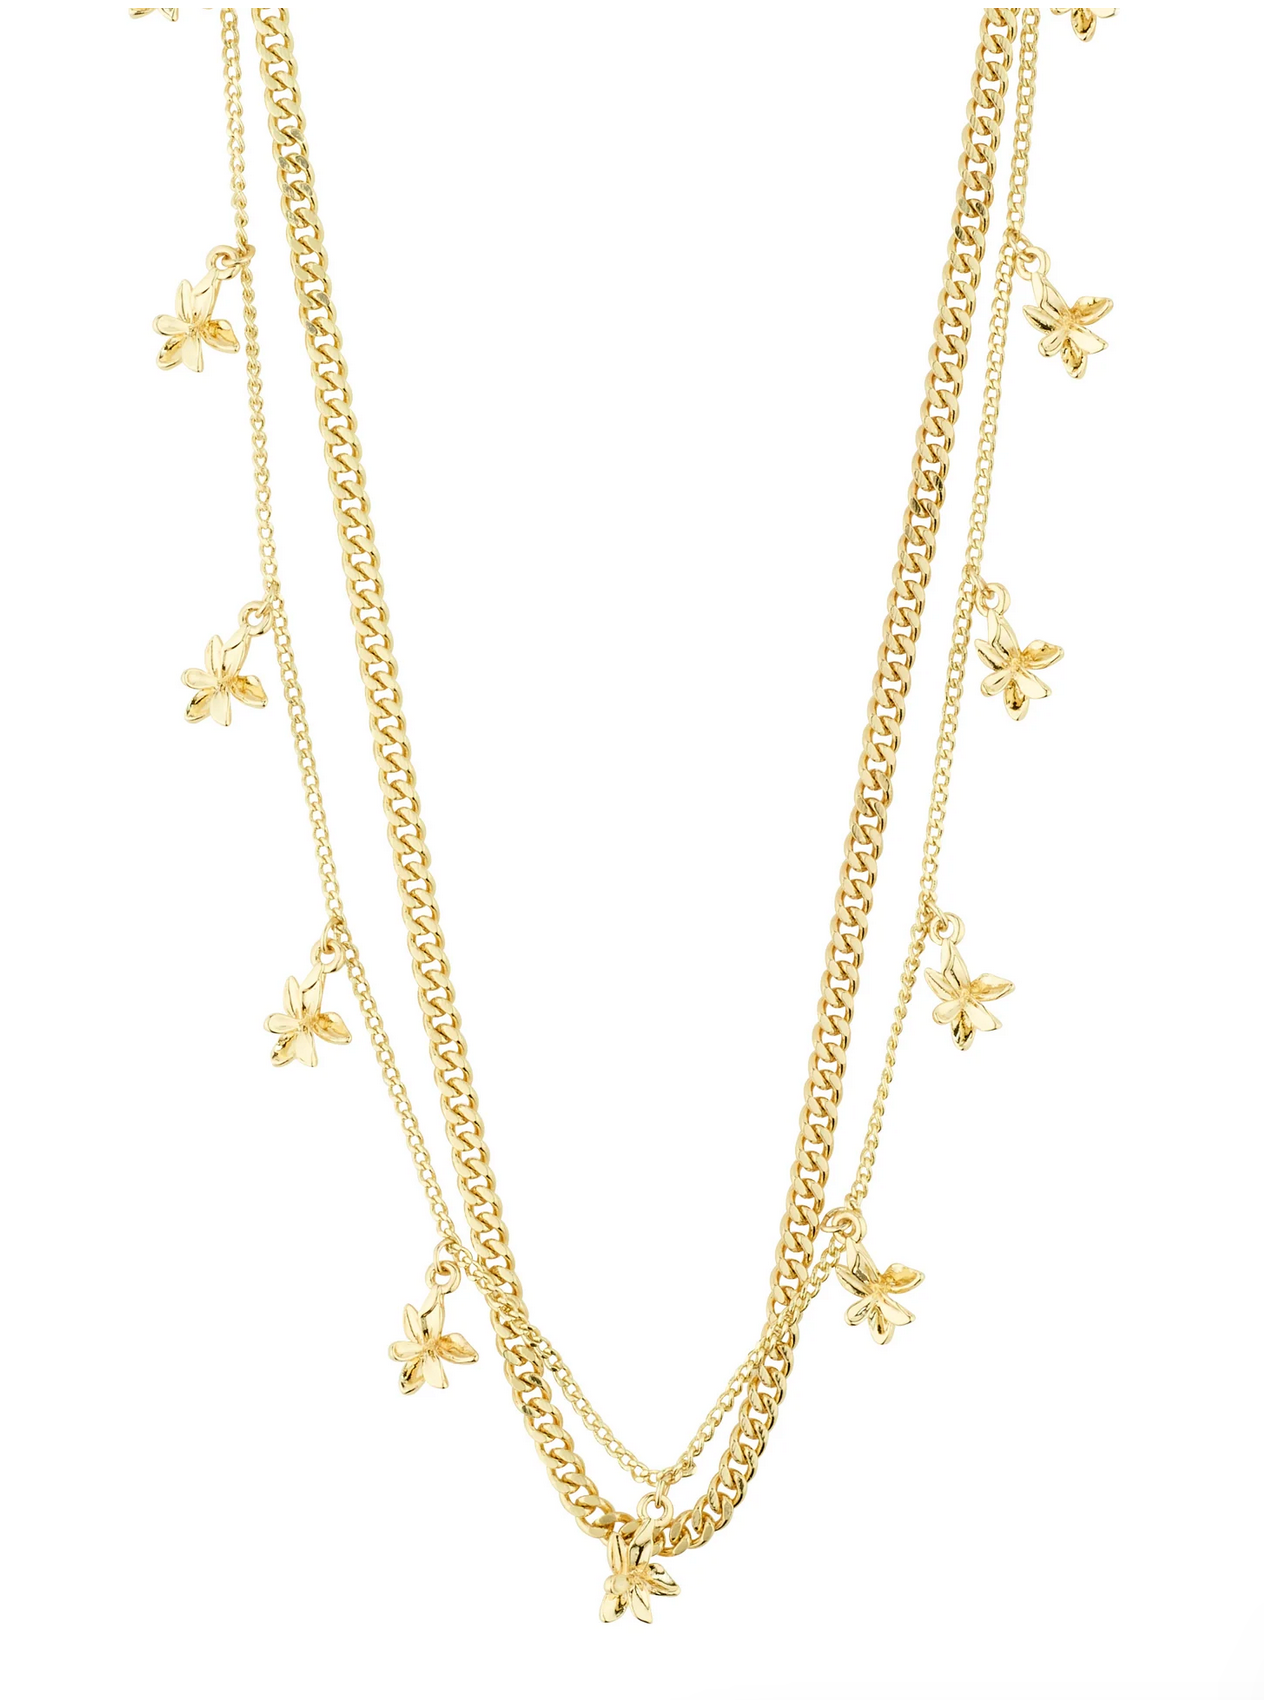 RIKO recycled necklaces 2-in-1 set GOLD